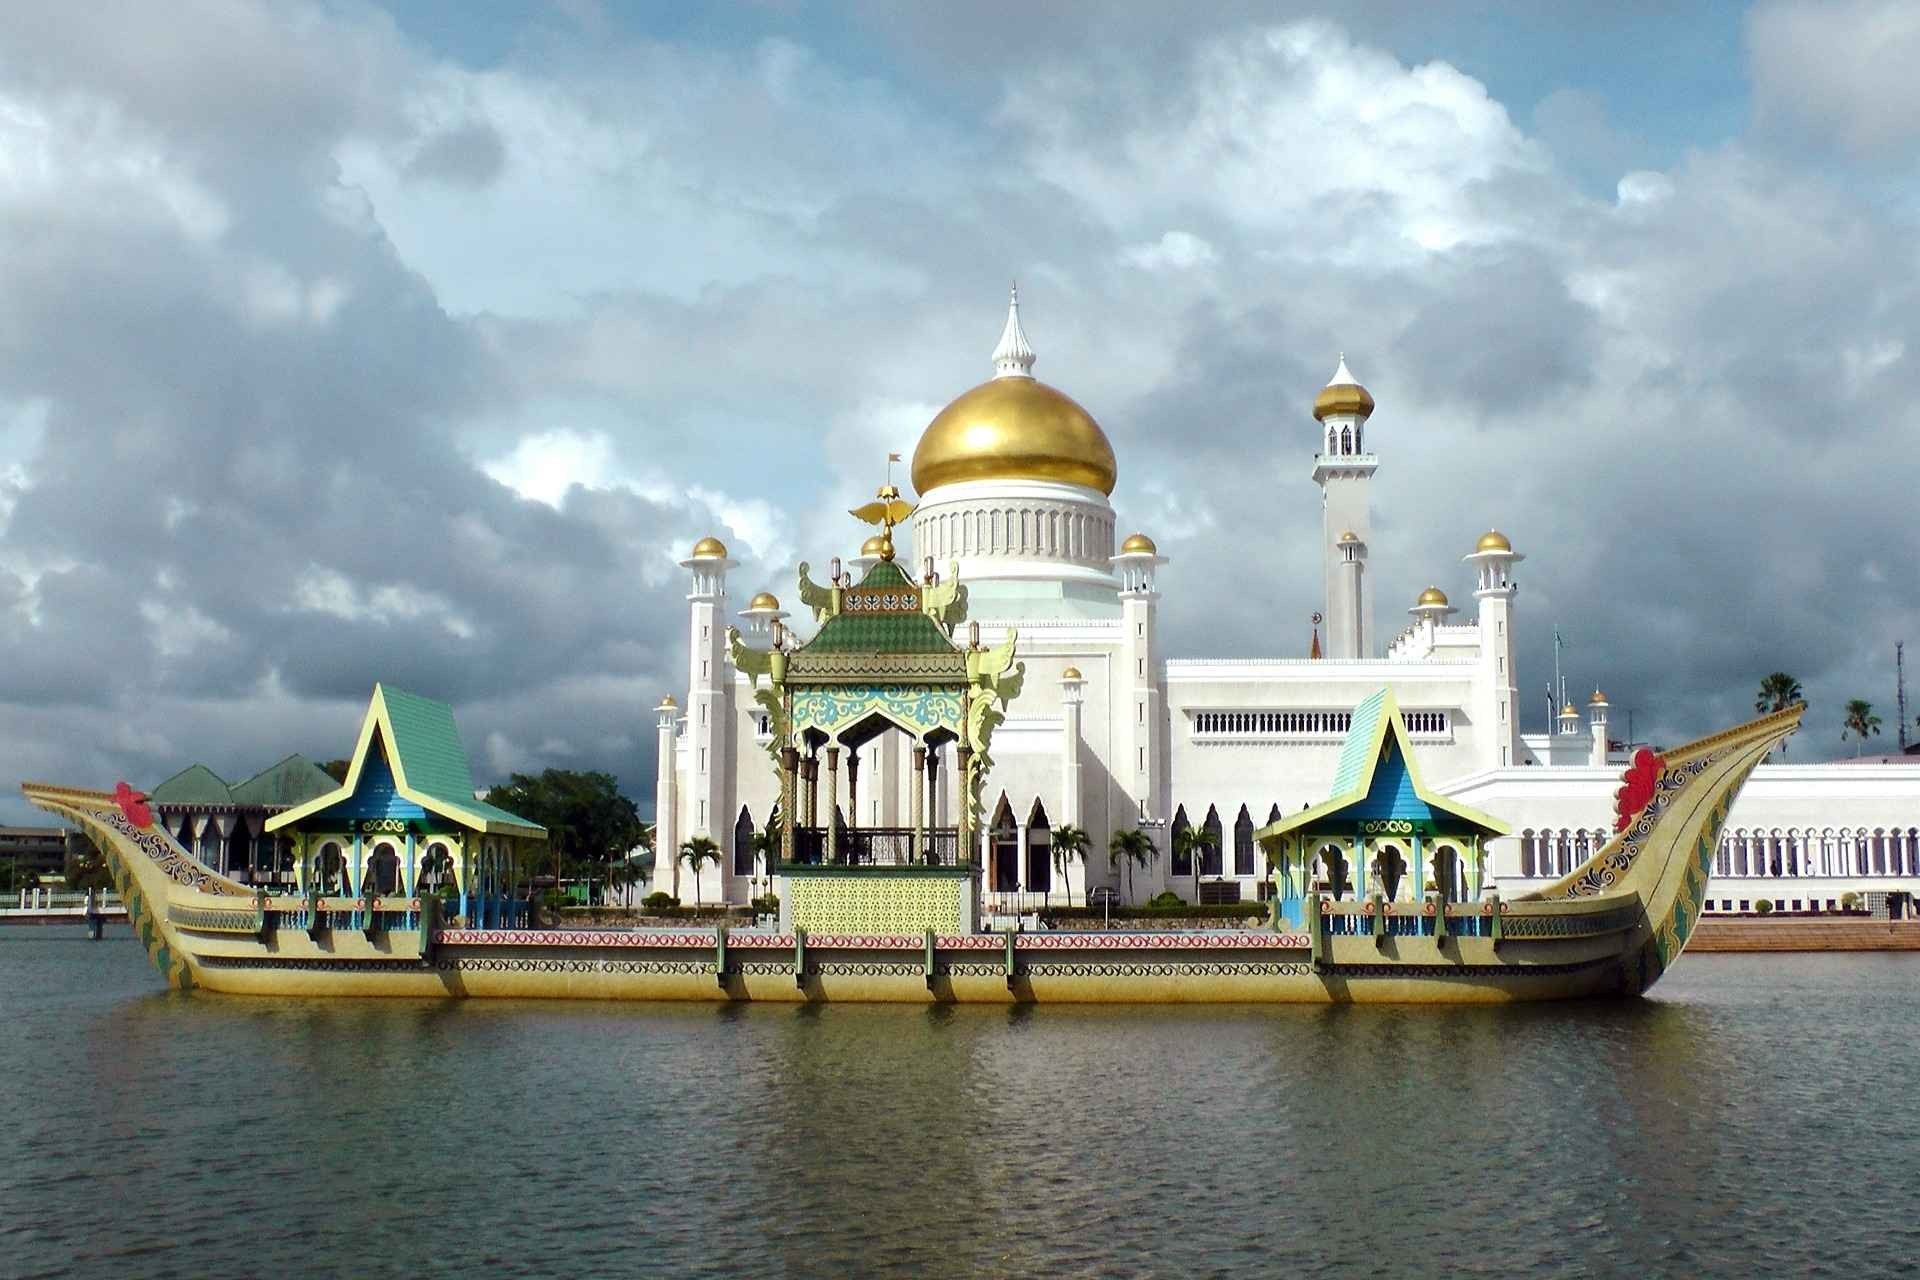 Tourism in Brunei … Enjoy a unforgettable trip in “The Land of Peace” Brunei ..